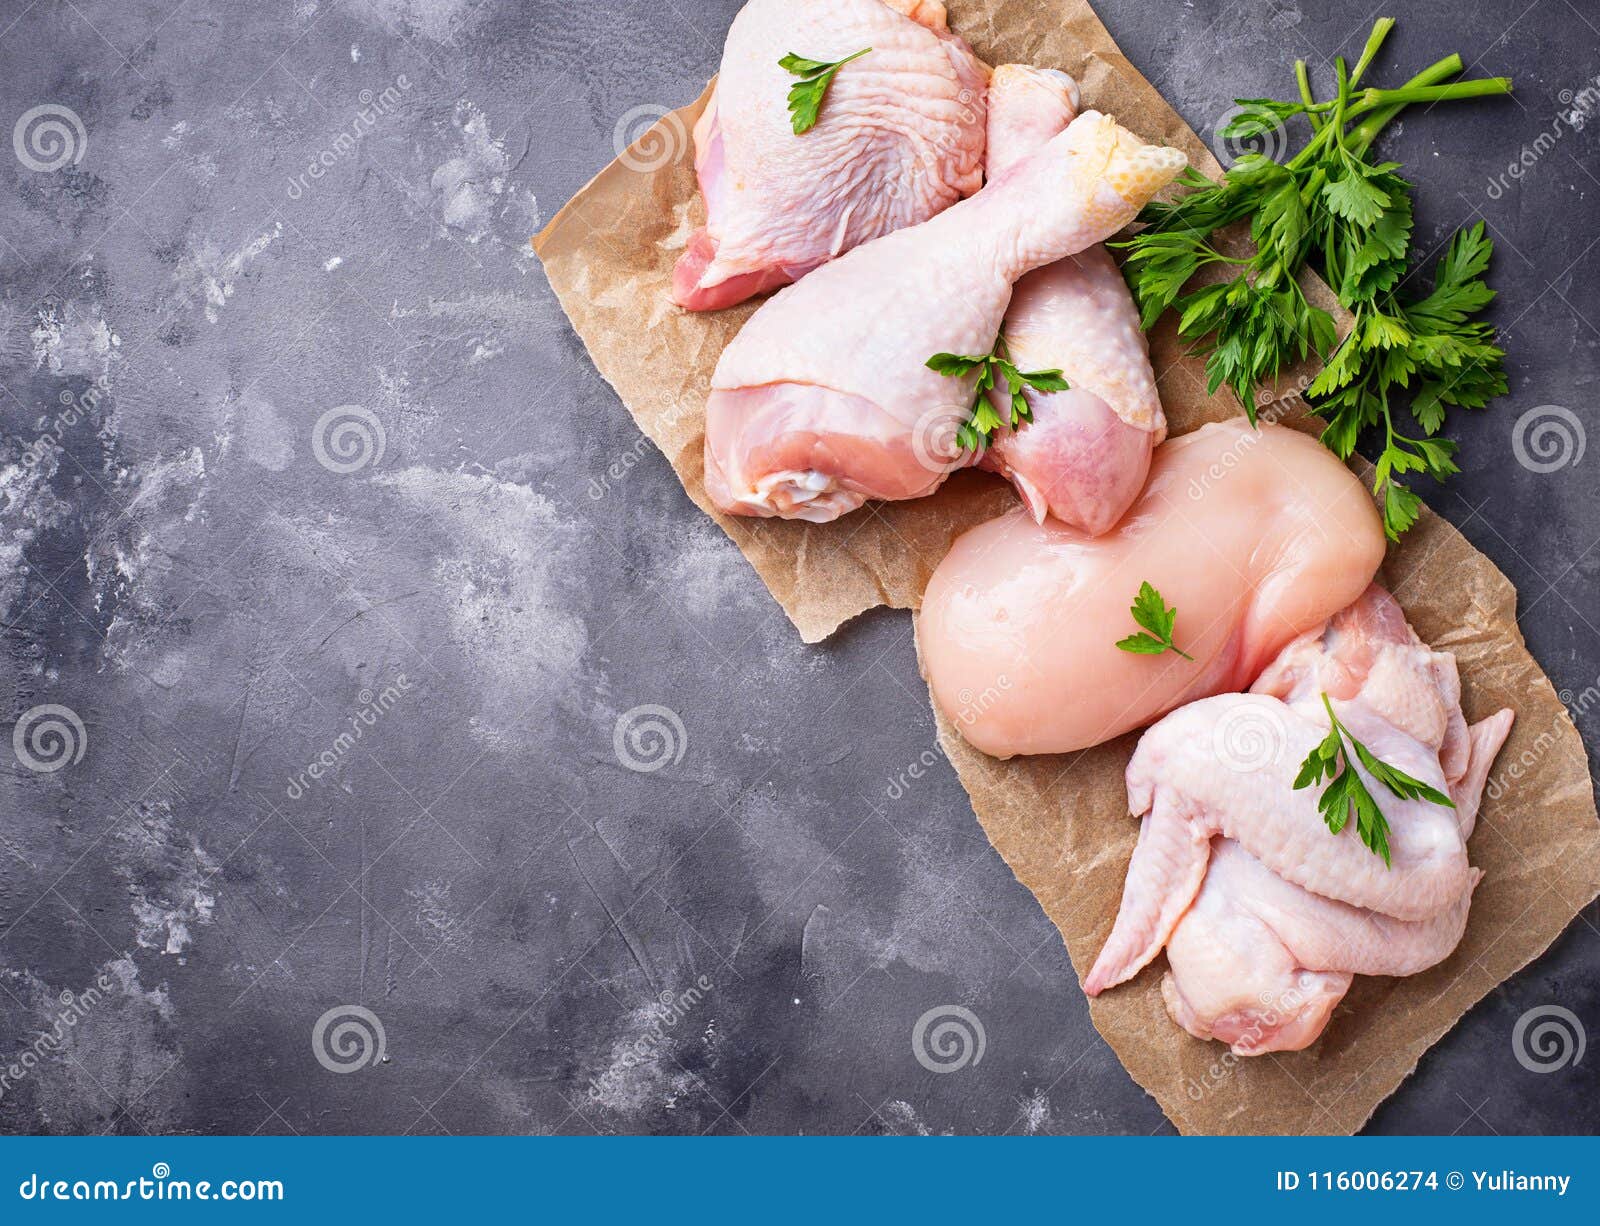 Raw Chicken Food Image & Photo (Free Trial)